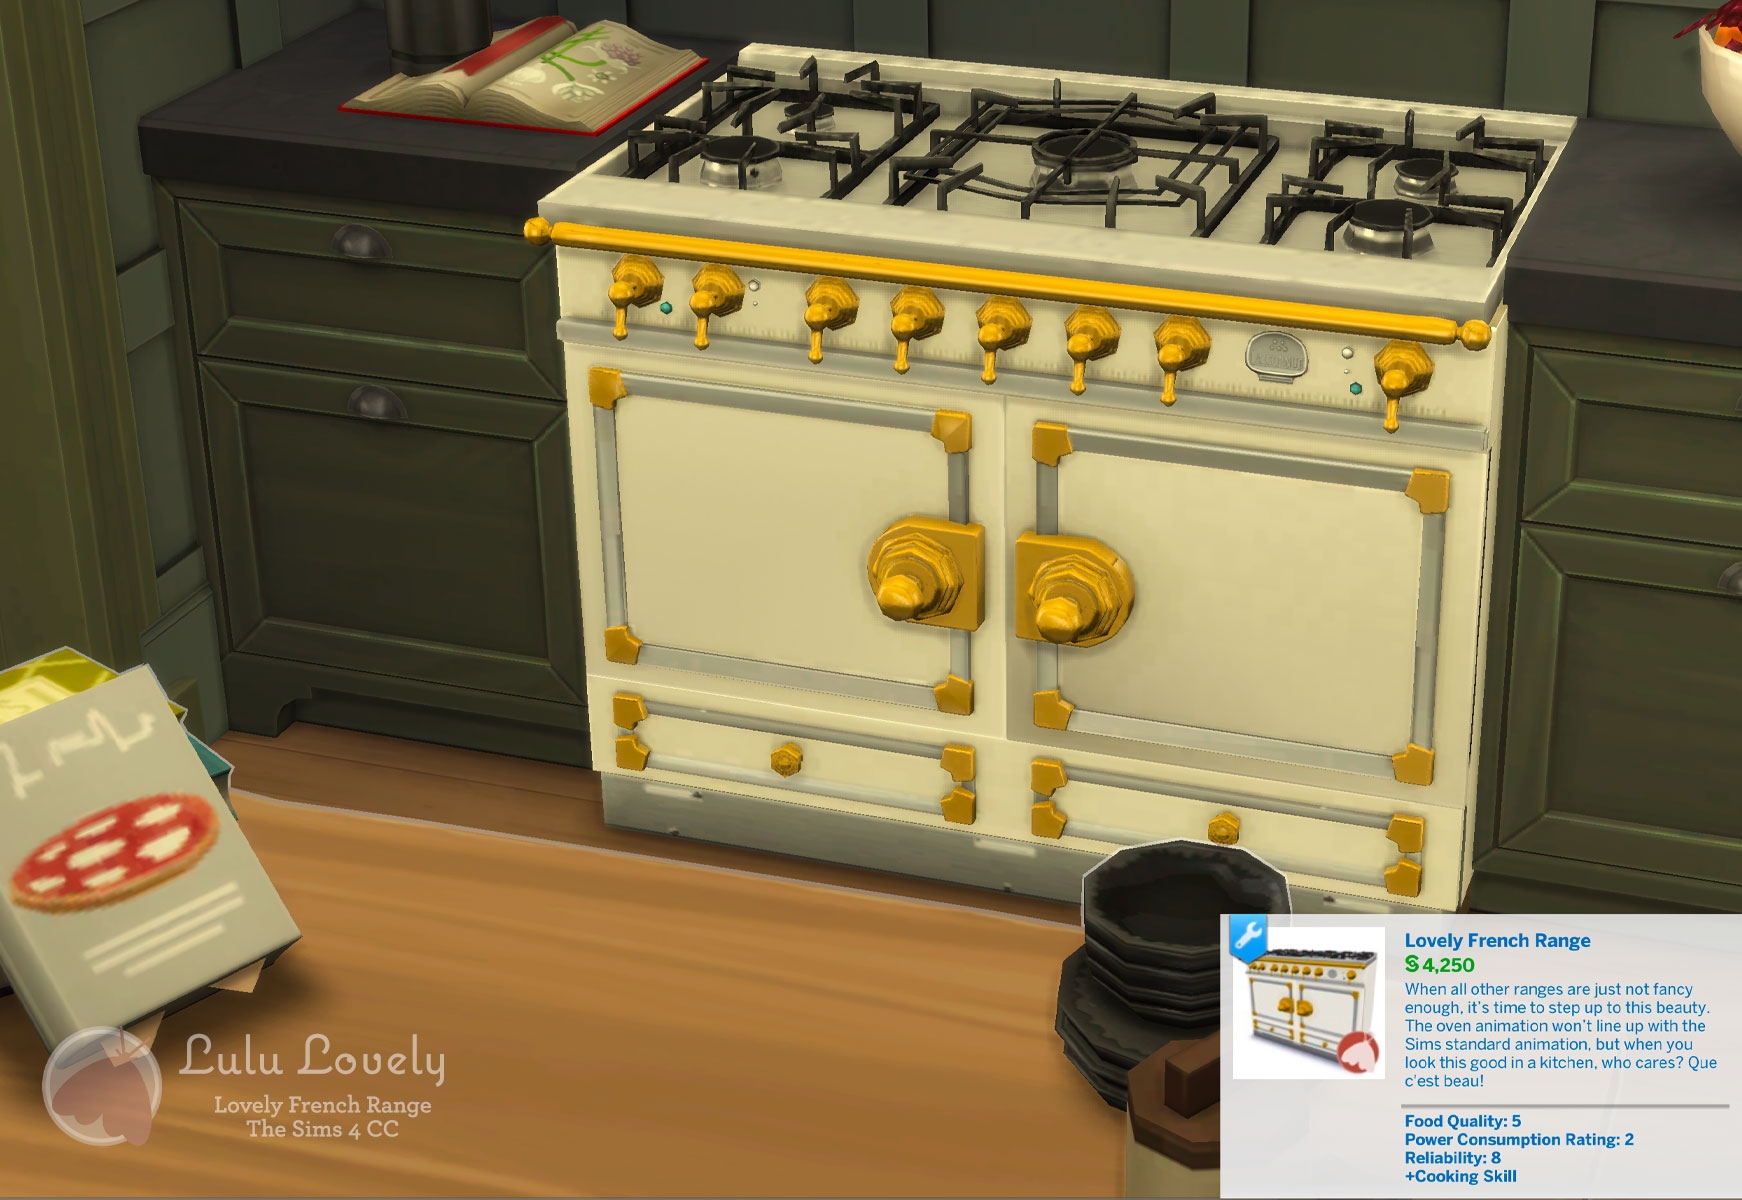 Lovely French Range | Sims 4 Mod by Lulu Lovely